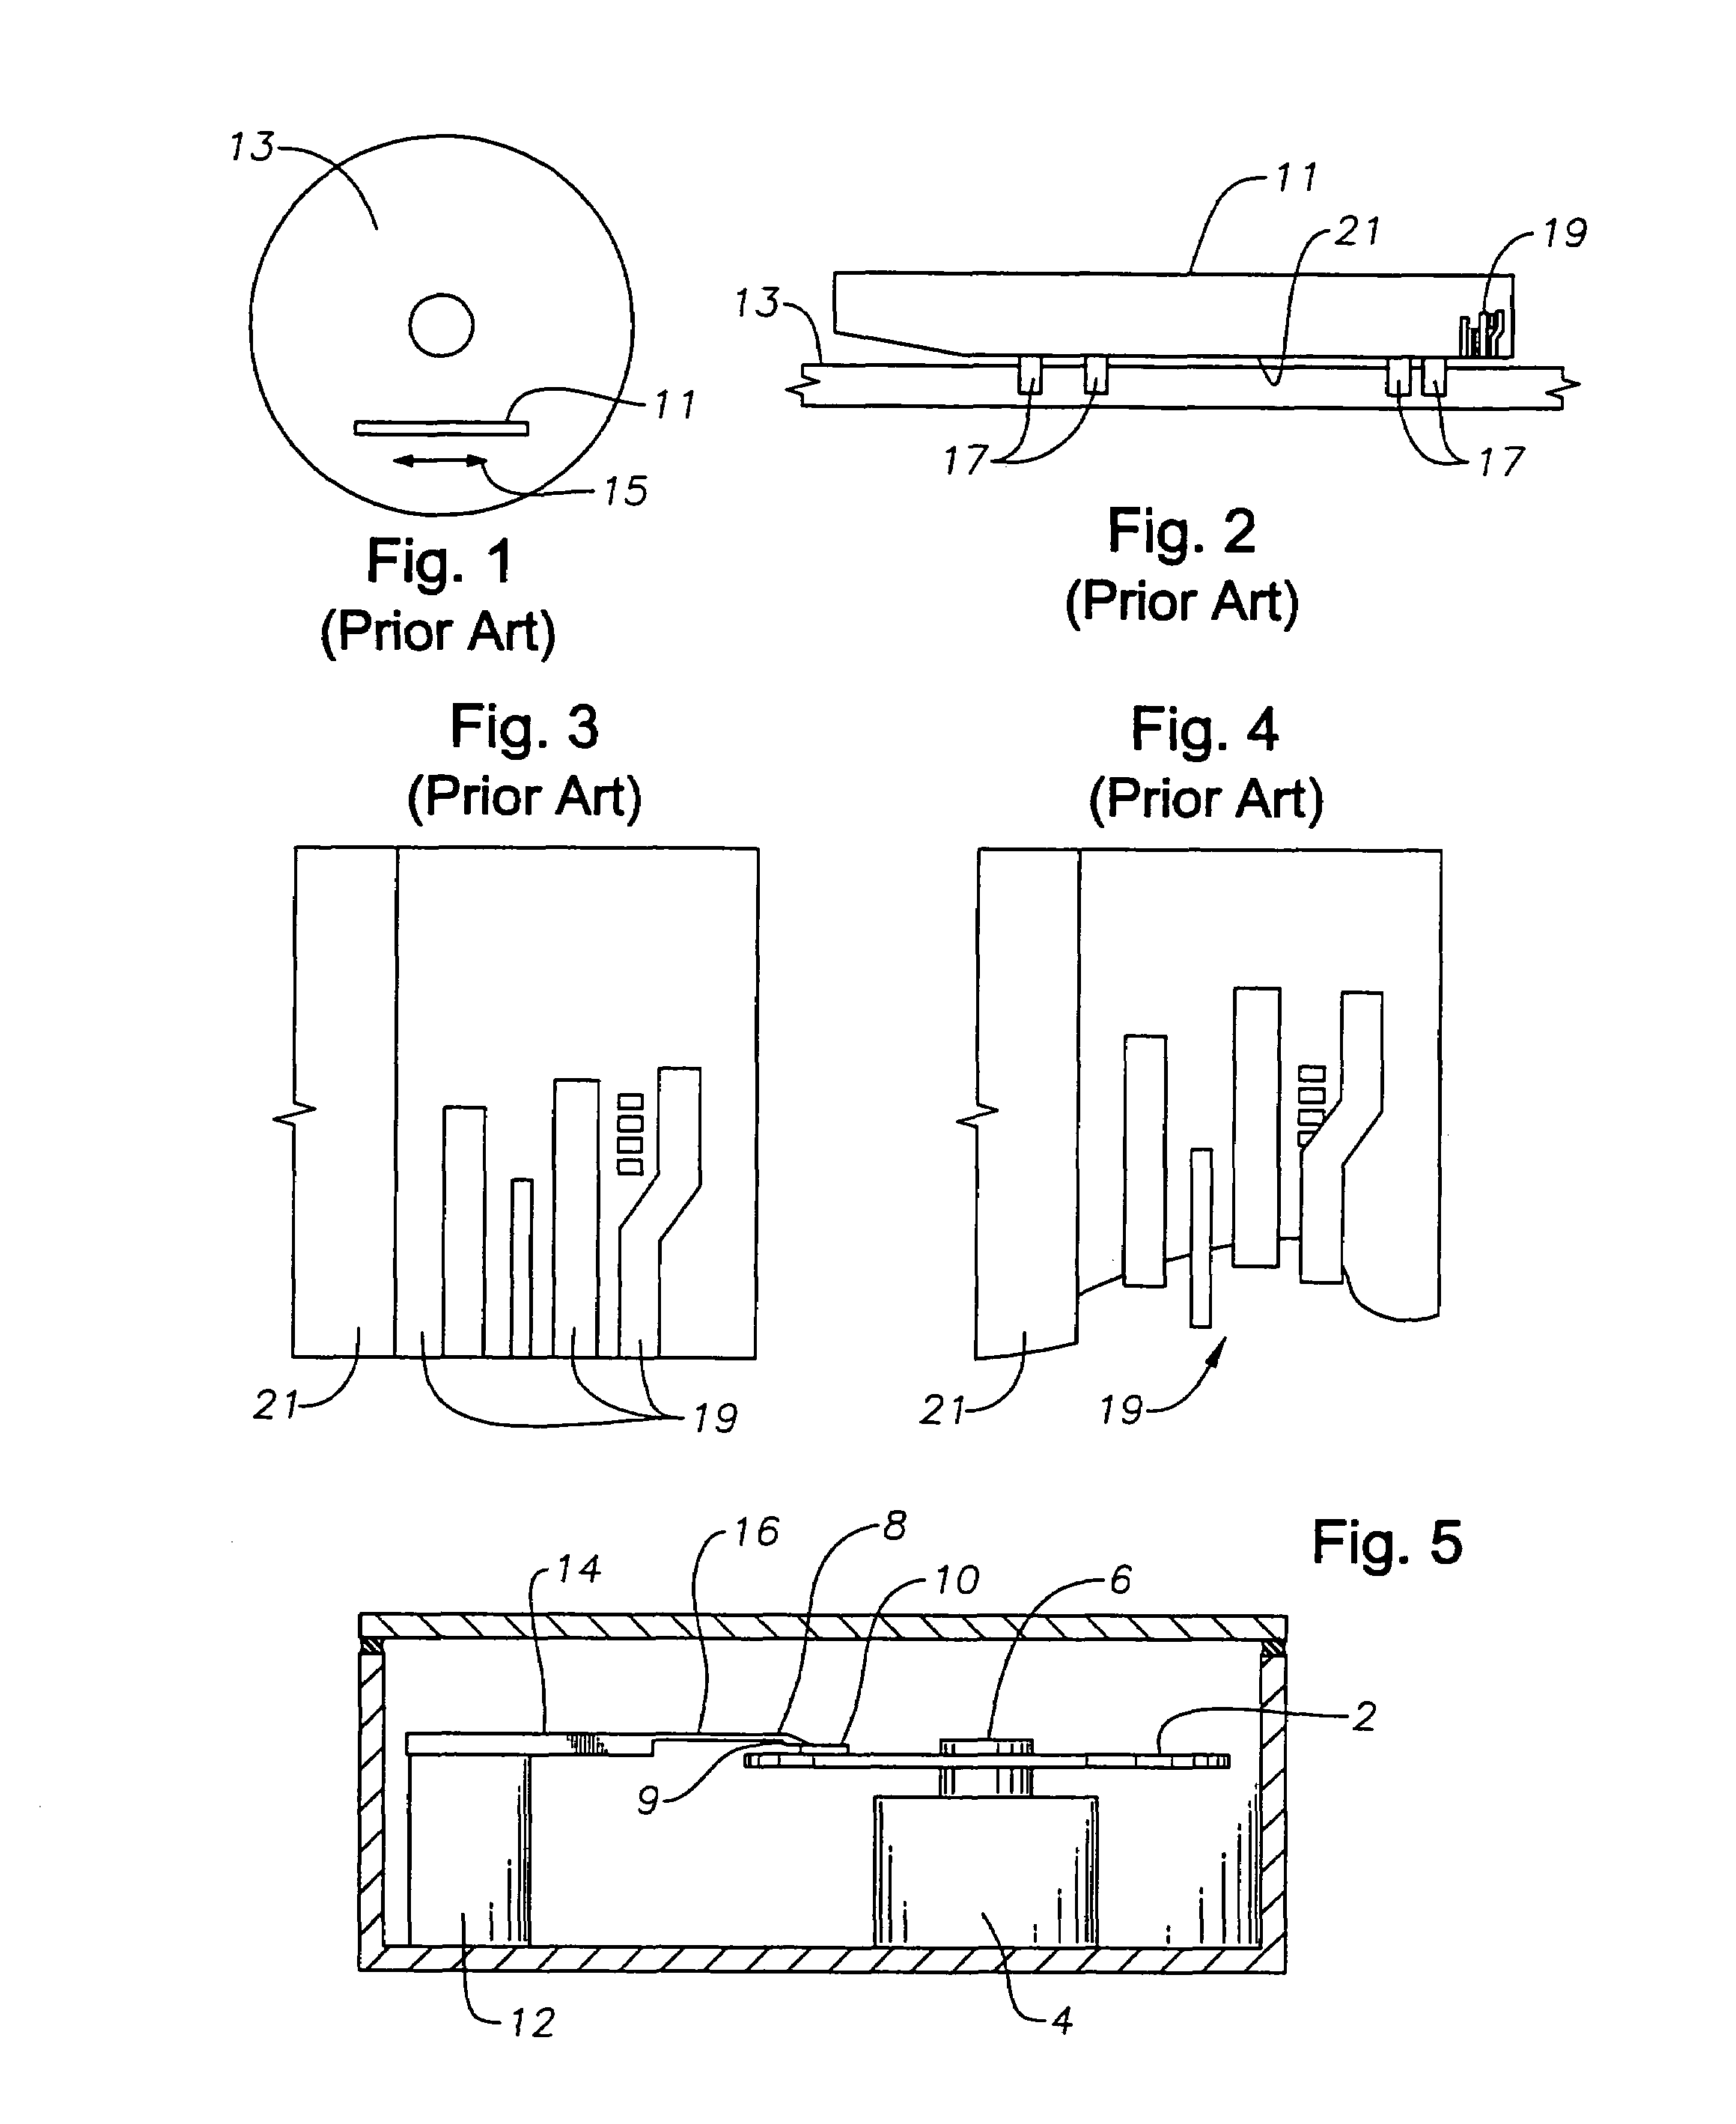 Apparatus and method for precise lapping of recessed and protruding elements in a workpiece